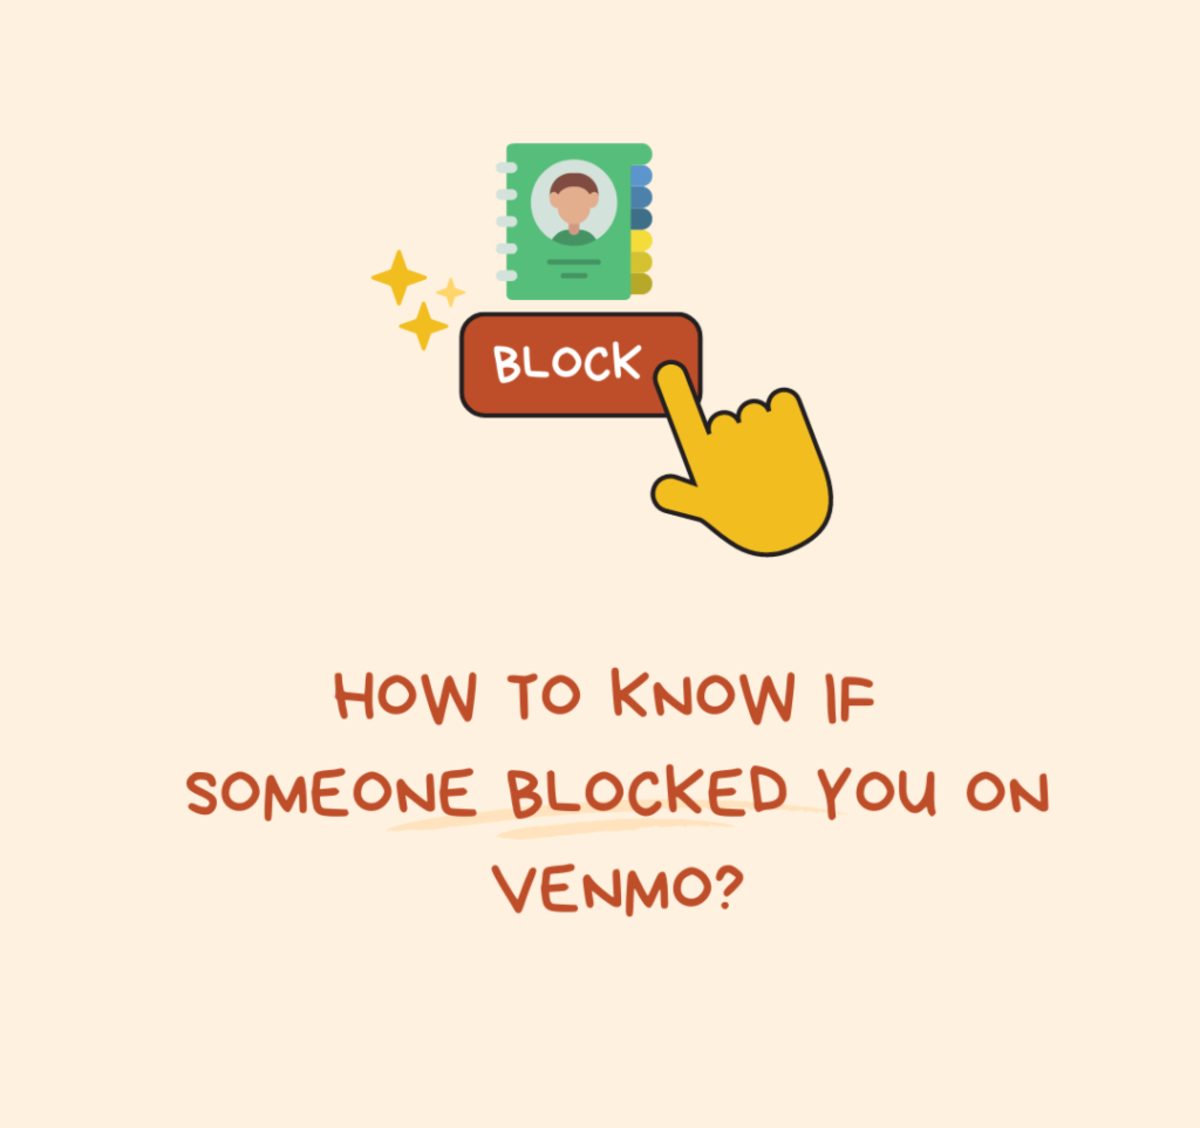 How Do You Know If Someone Blocked You On Venmo